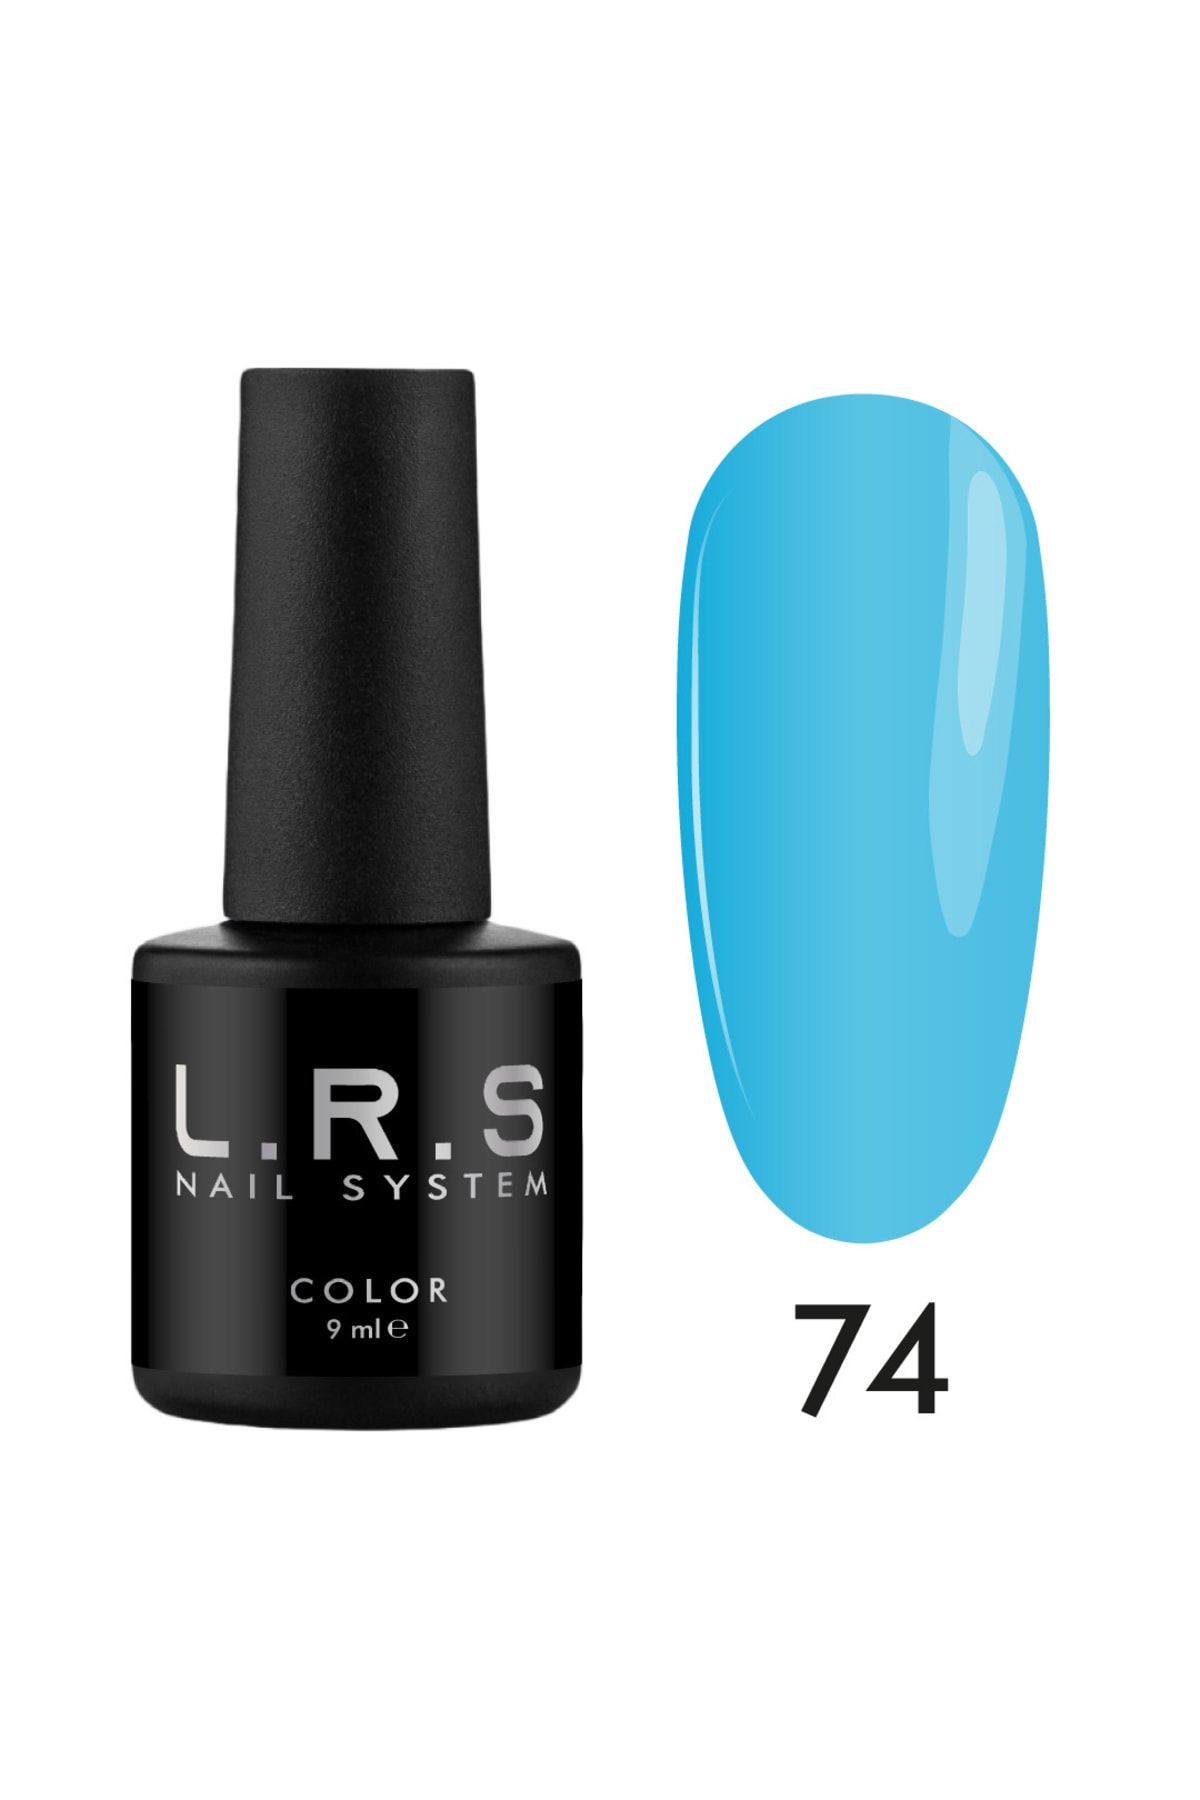 PNB Lrs Nail System 9ml Color 74